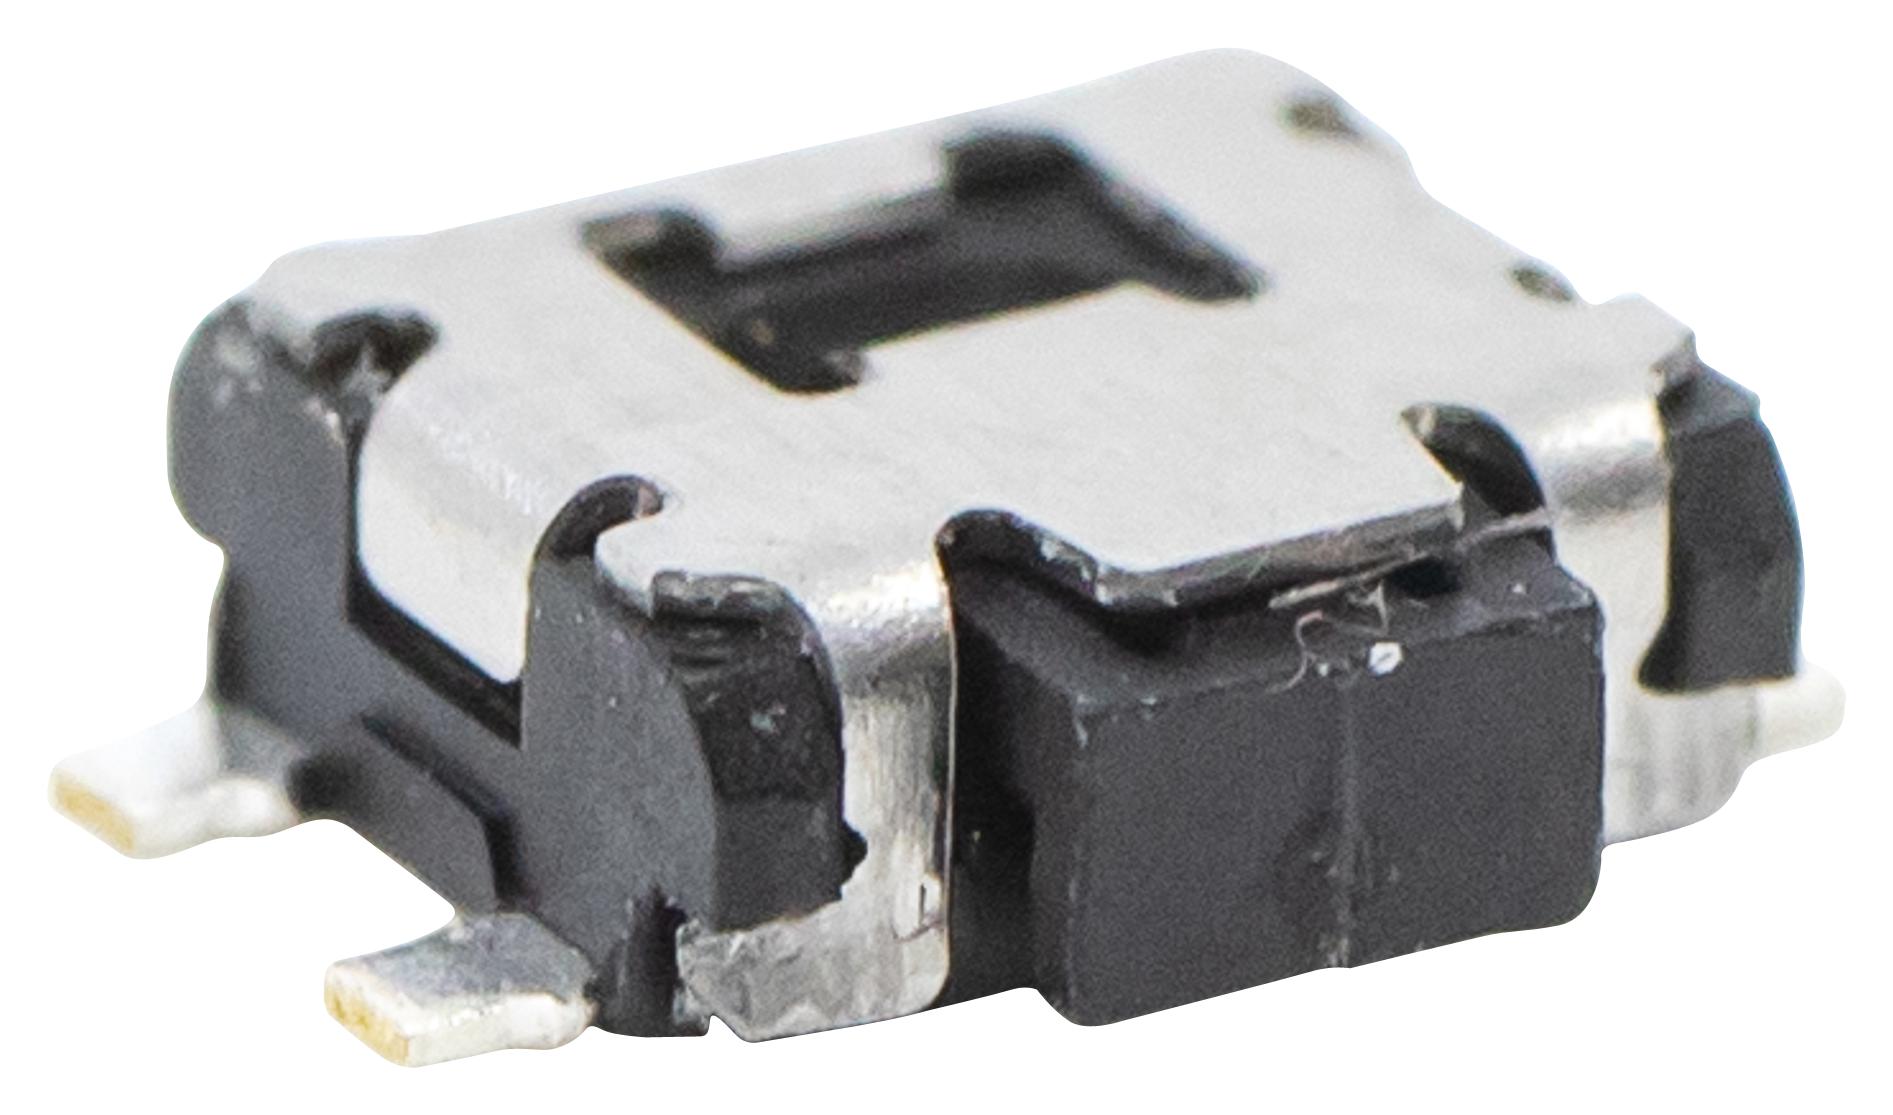 E-Switch Tl1016Abf160Qg Tactile Switch, 0.05A, 12Vdc, Smd, 160Gf